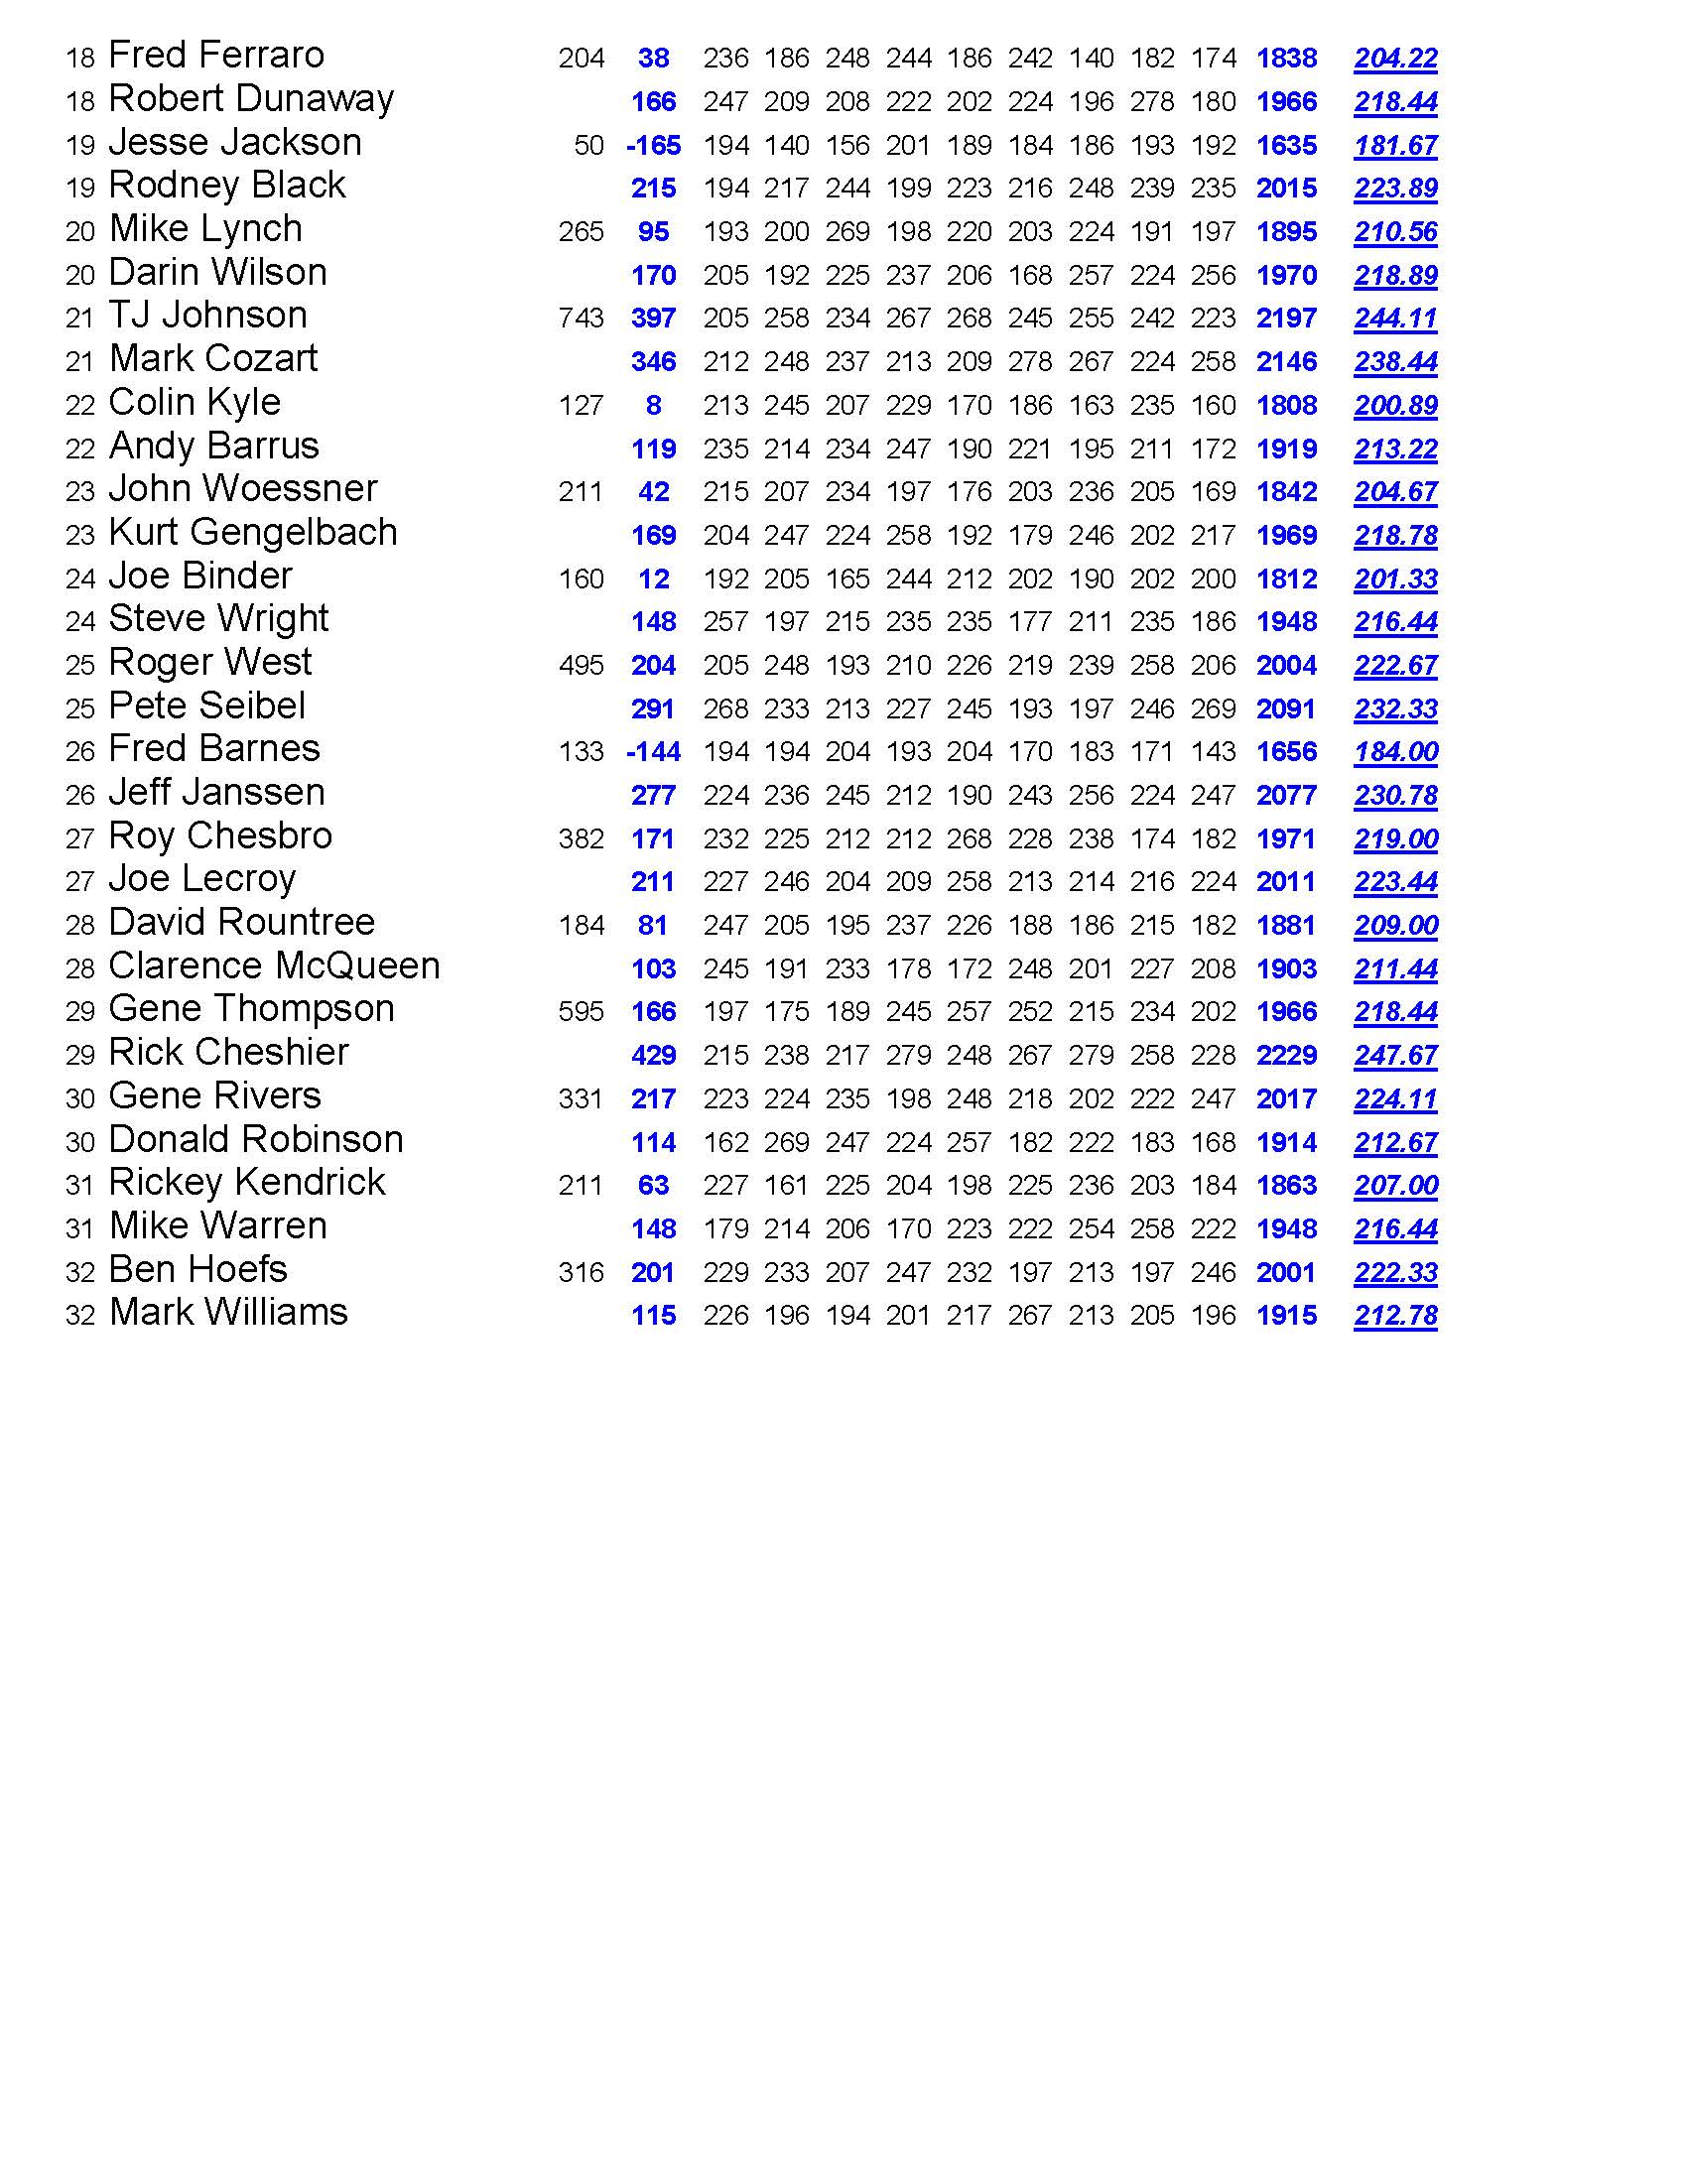 09052021results_Page_3